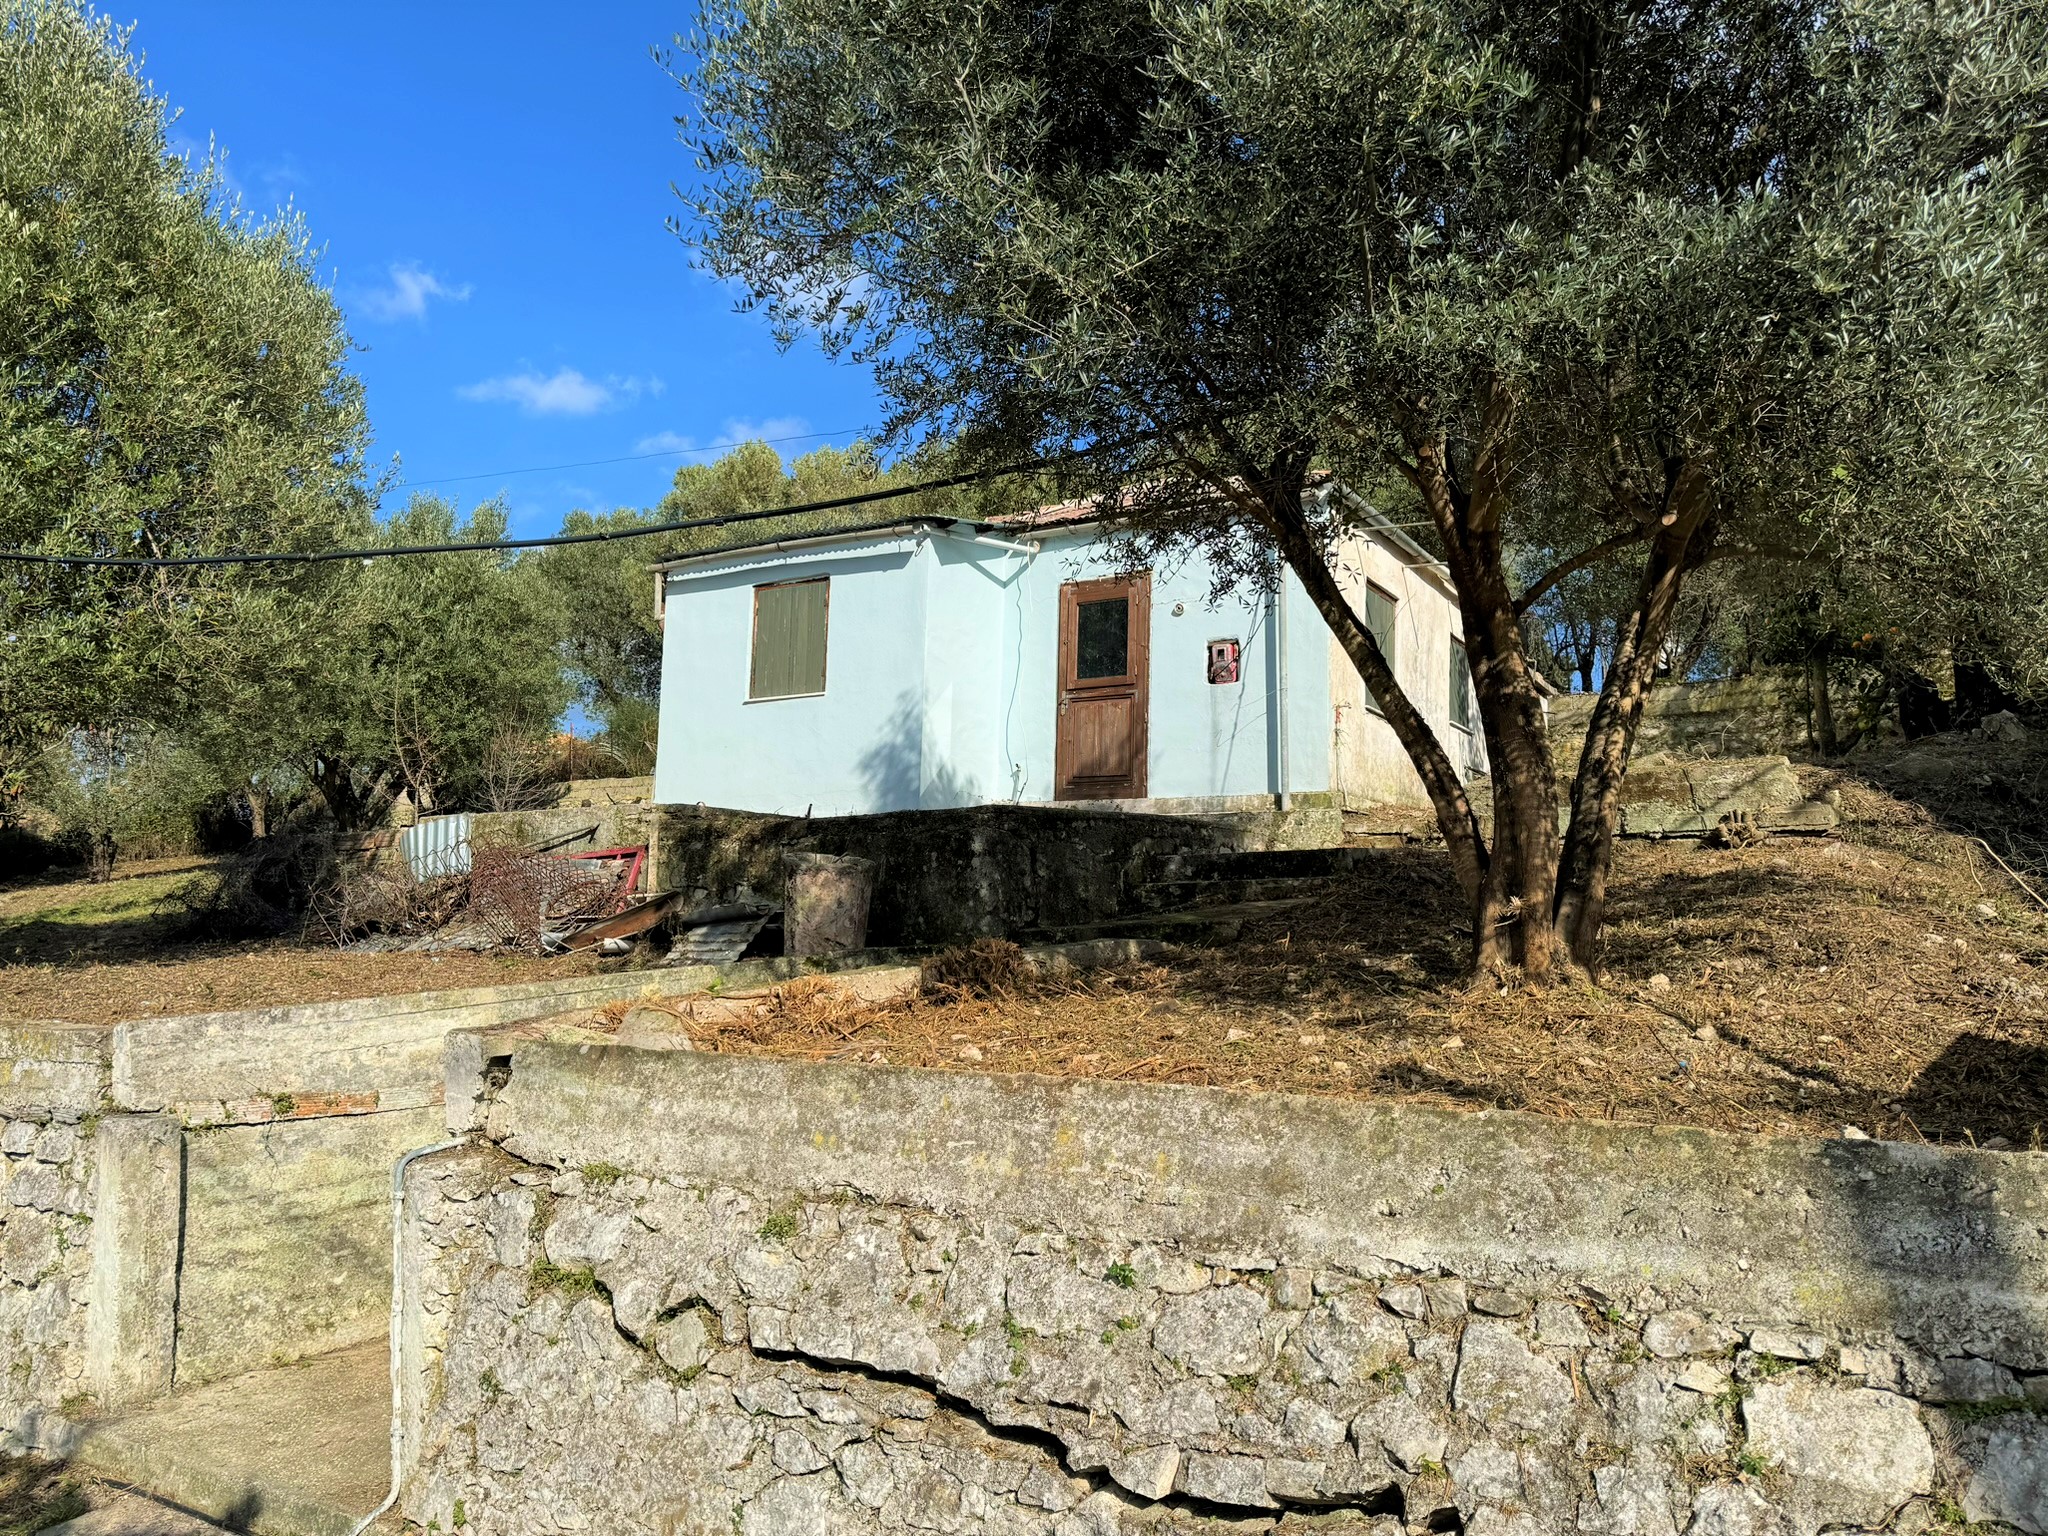 External views of house for sale in Ithaca Greece, Platrithya